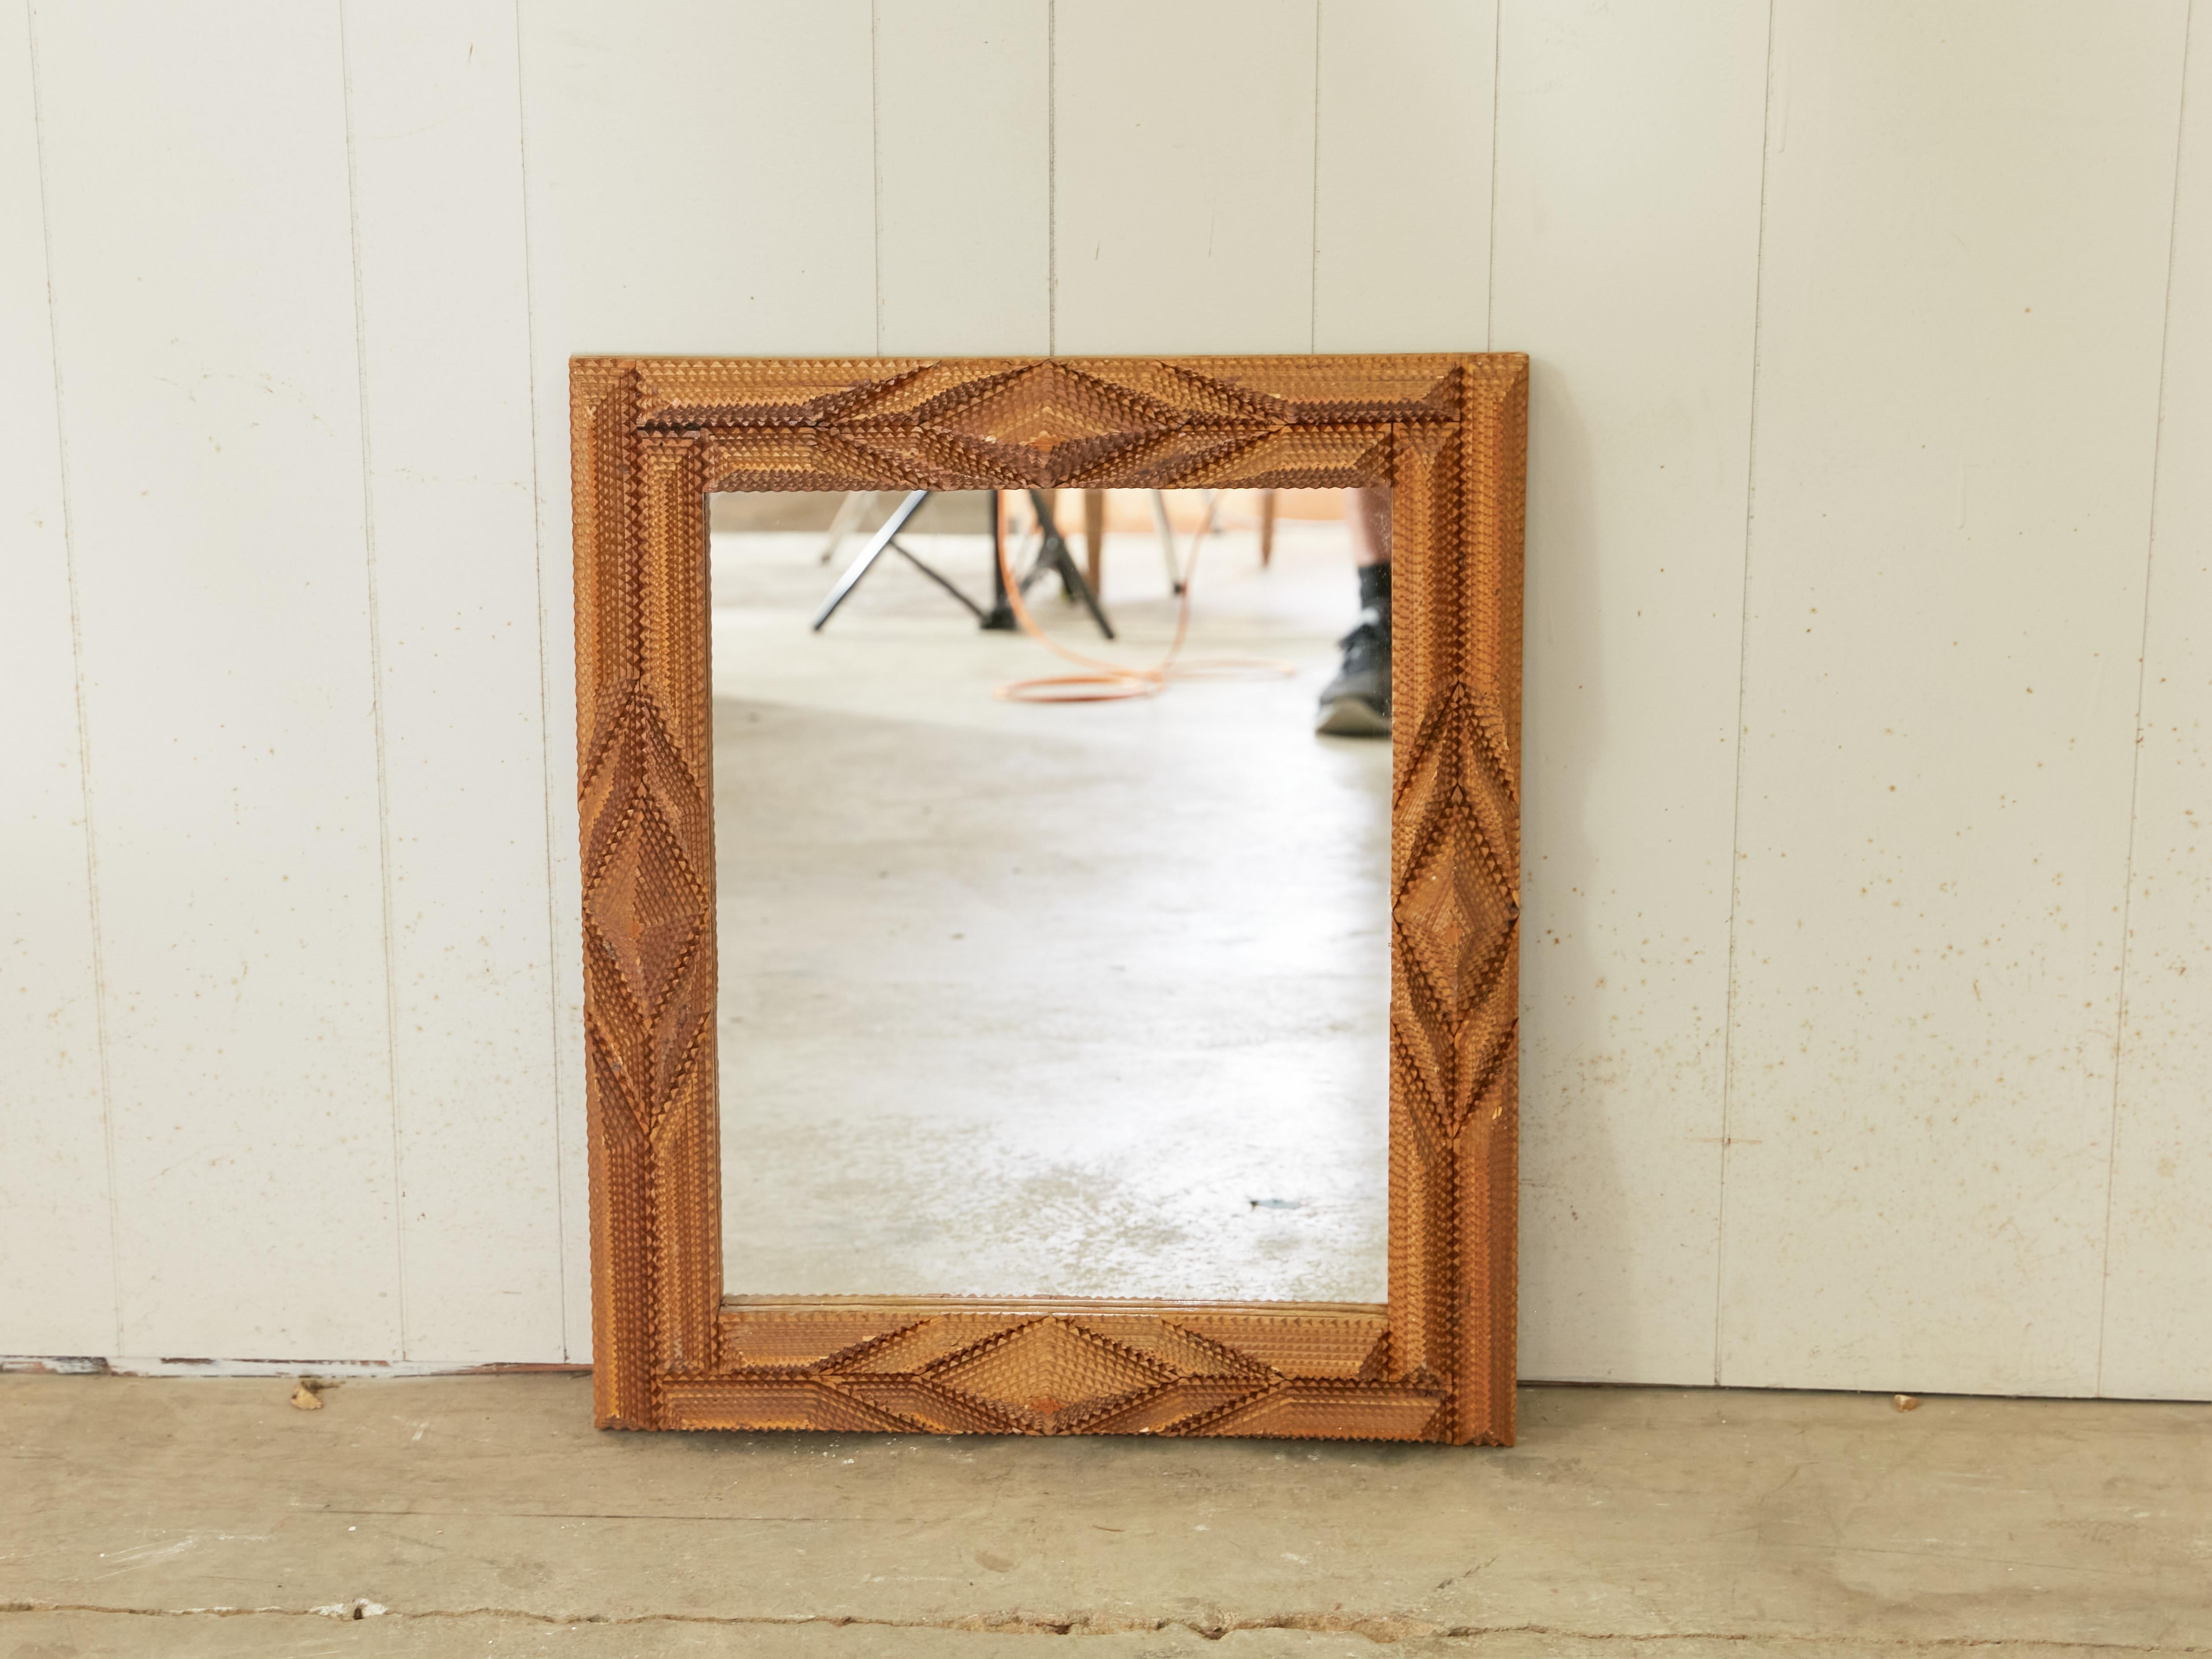 A French rectangular Tramp Art hand-carved wooden mirror from the early 20th century, with raised diamond motifs and geometric patterns. Created in France during the first quarter of the 20th century, this wall mirror was hand carved in the manner